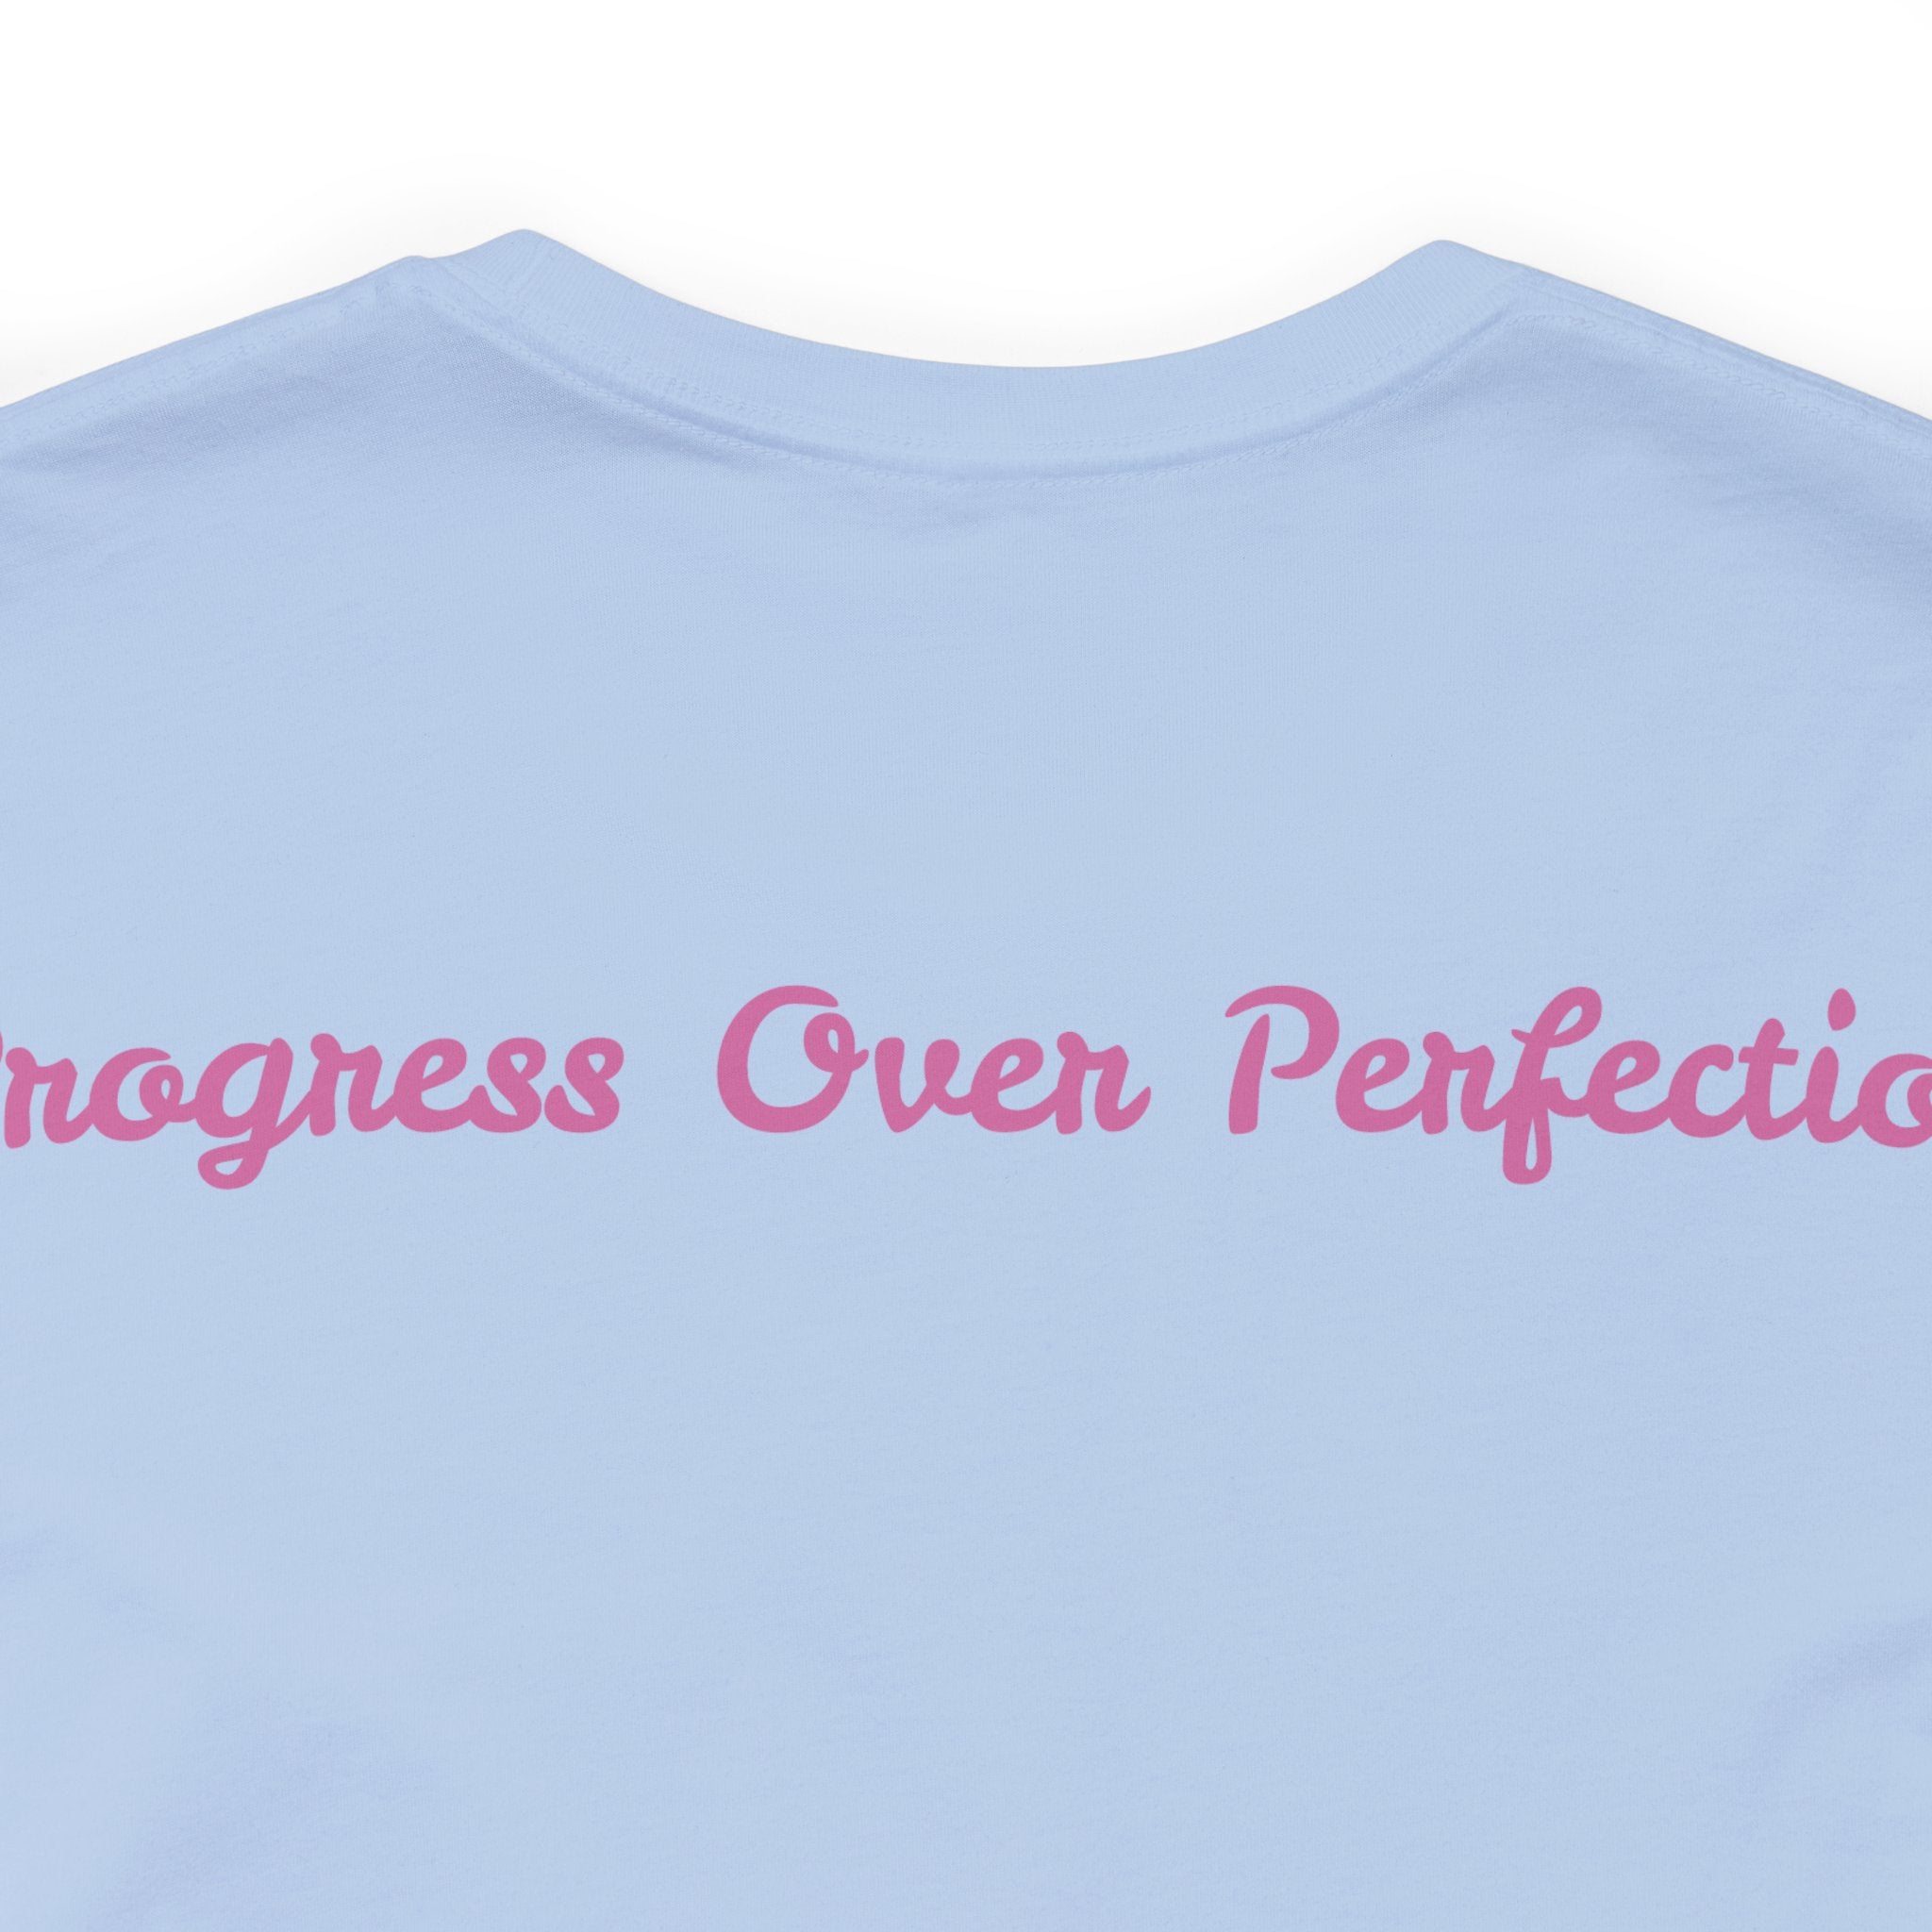 Progress Over Perfection Tee - Bella+Canvas 3001 Yellow Airlume Cotton Bella+Canvas 3001 Crew Neckline Jersey Short Sleeve Lightweight Fabric Mental Health Support Retail Fit Tear-away Label Tee Unisex Tee T-Shirt 6322474119554612206_2048 Printify